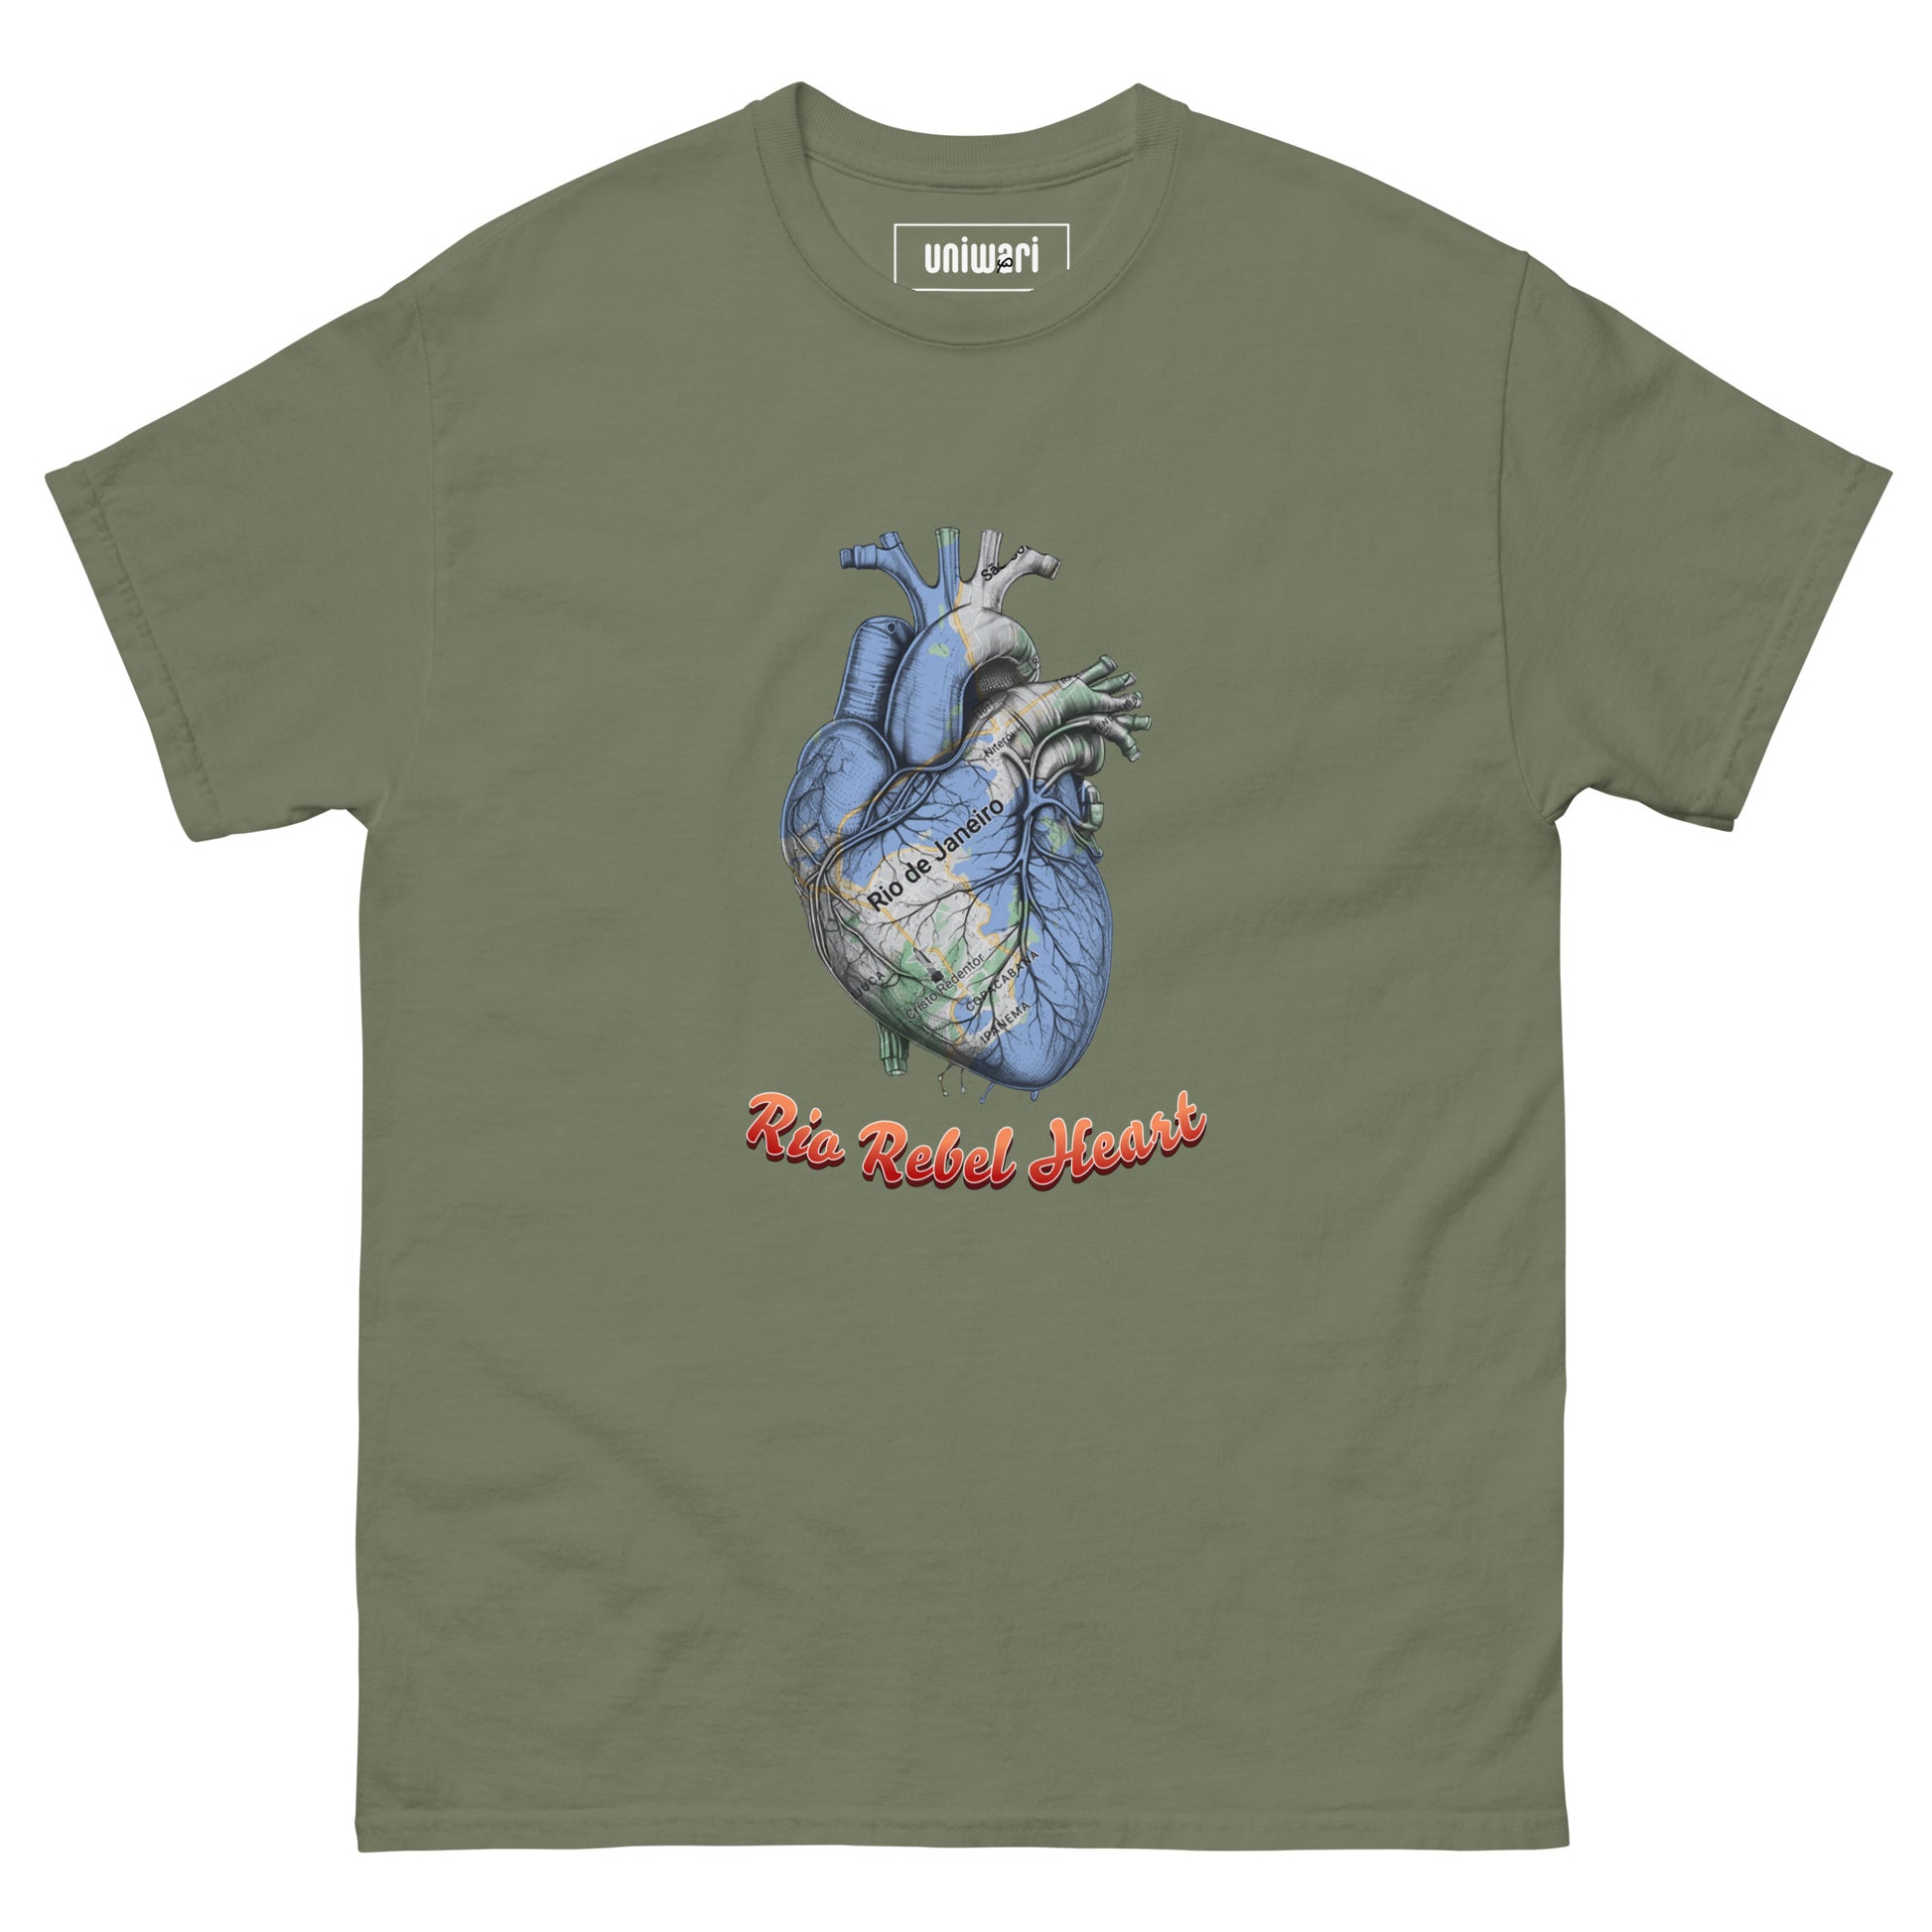 Green High Quality Tee - Front Design with a Heart Shaped Map of Rio de Janeiro and a Phrase "Rio Rebel Heart" print